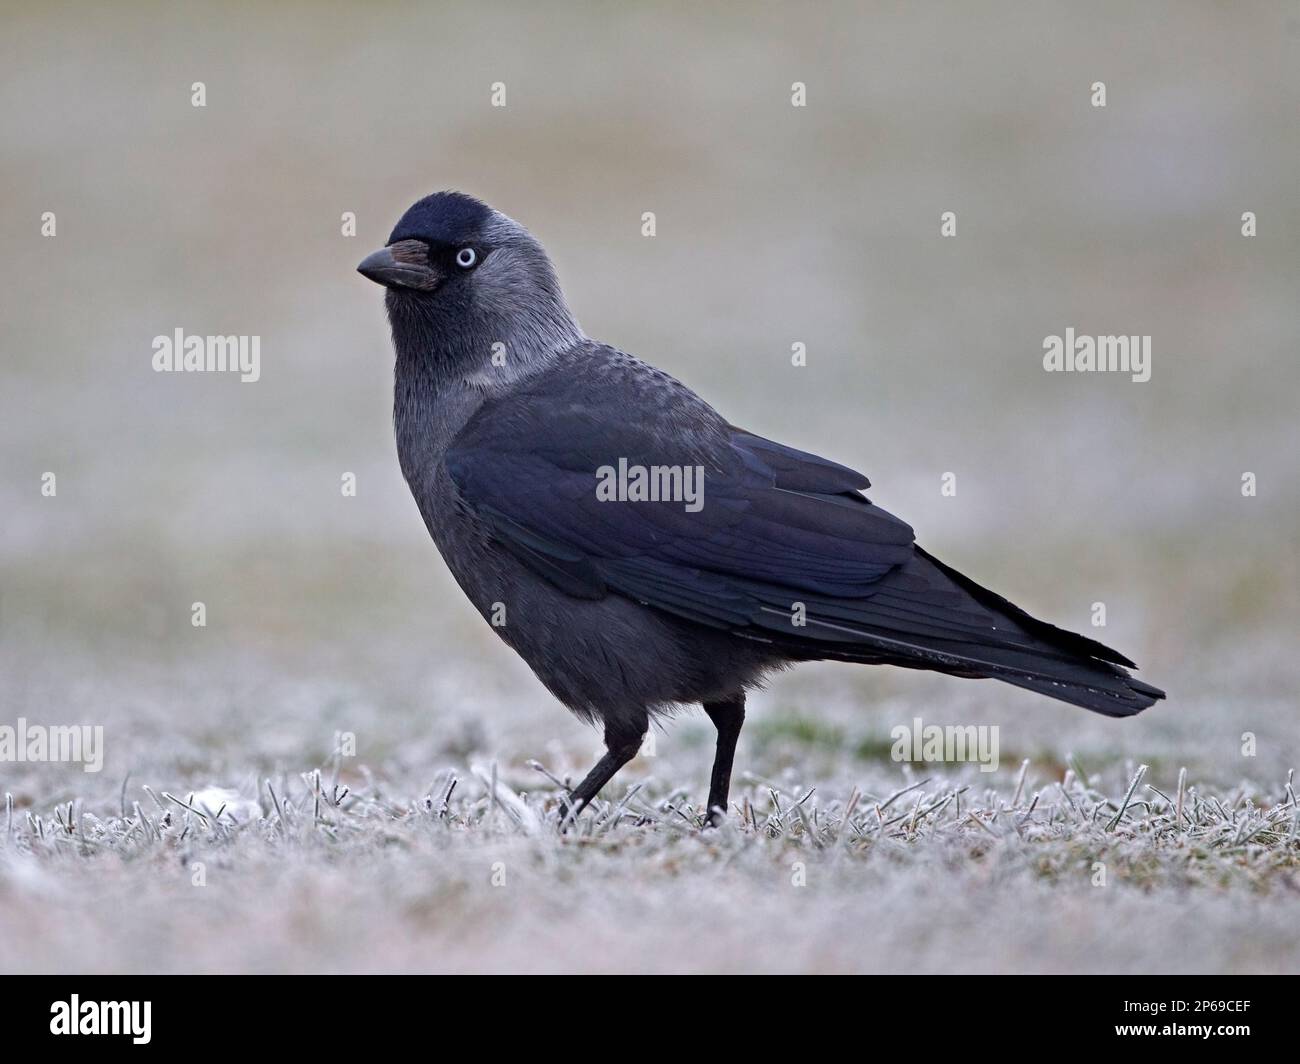 Hooded crow standing Stock Photo